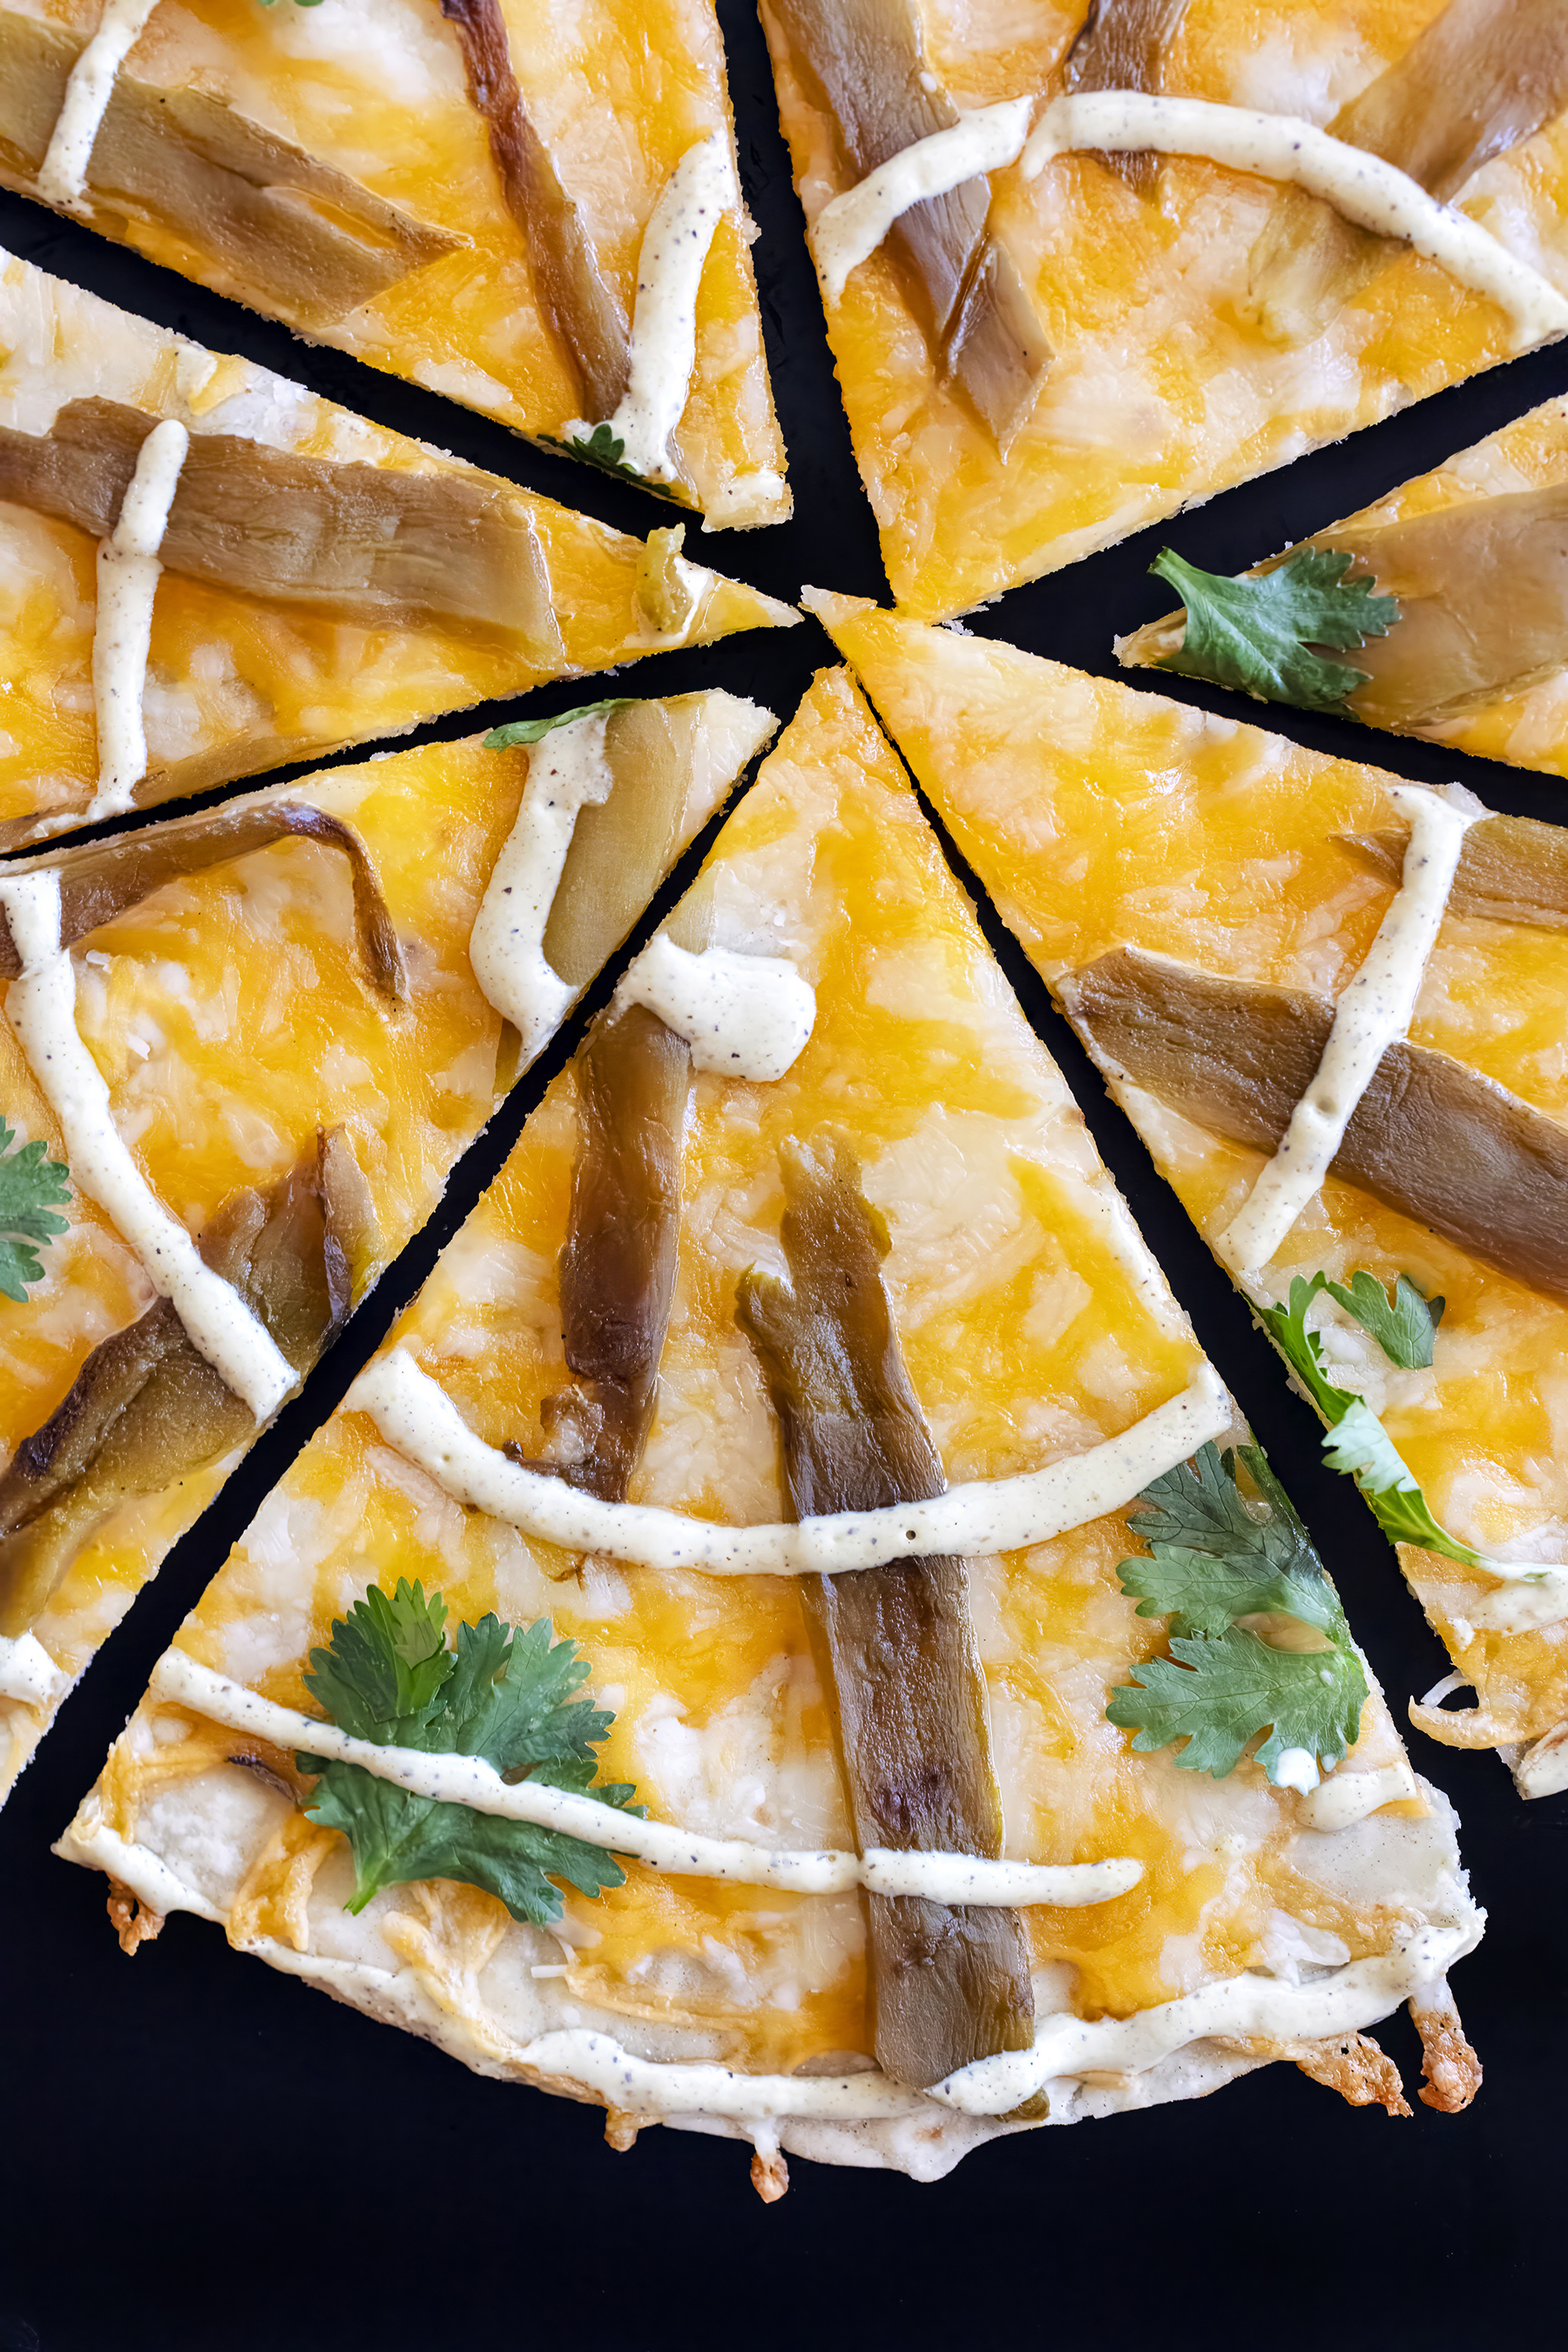 slices of flour tortilla cheese crisp with mexican blend cheese roasted green chile strip, cilantro leaves and ranch spiral.